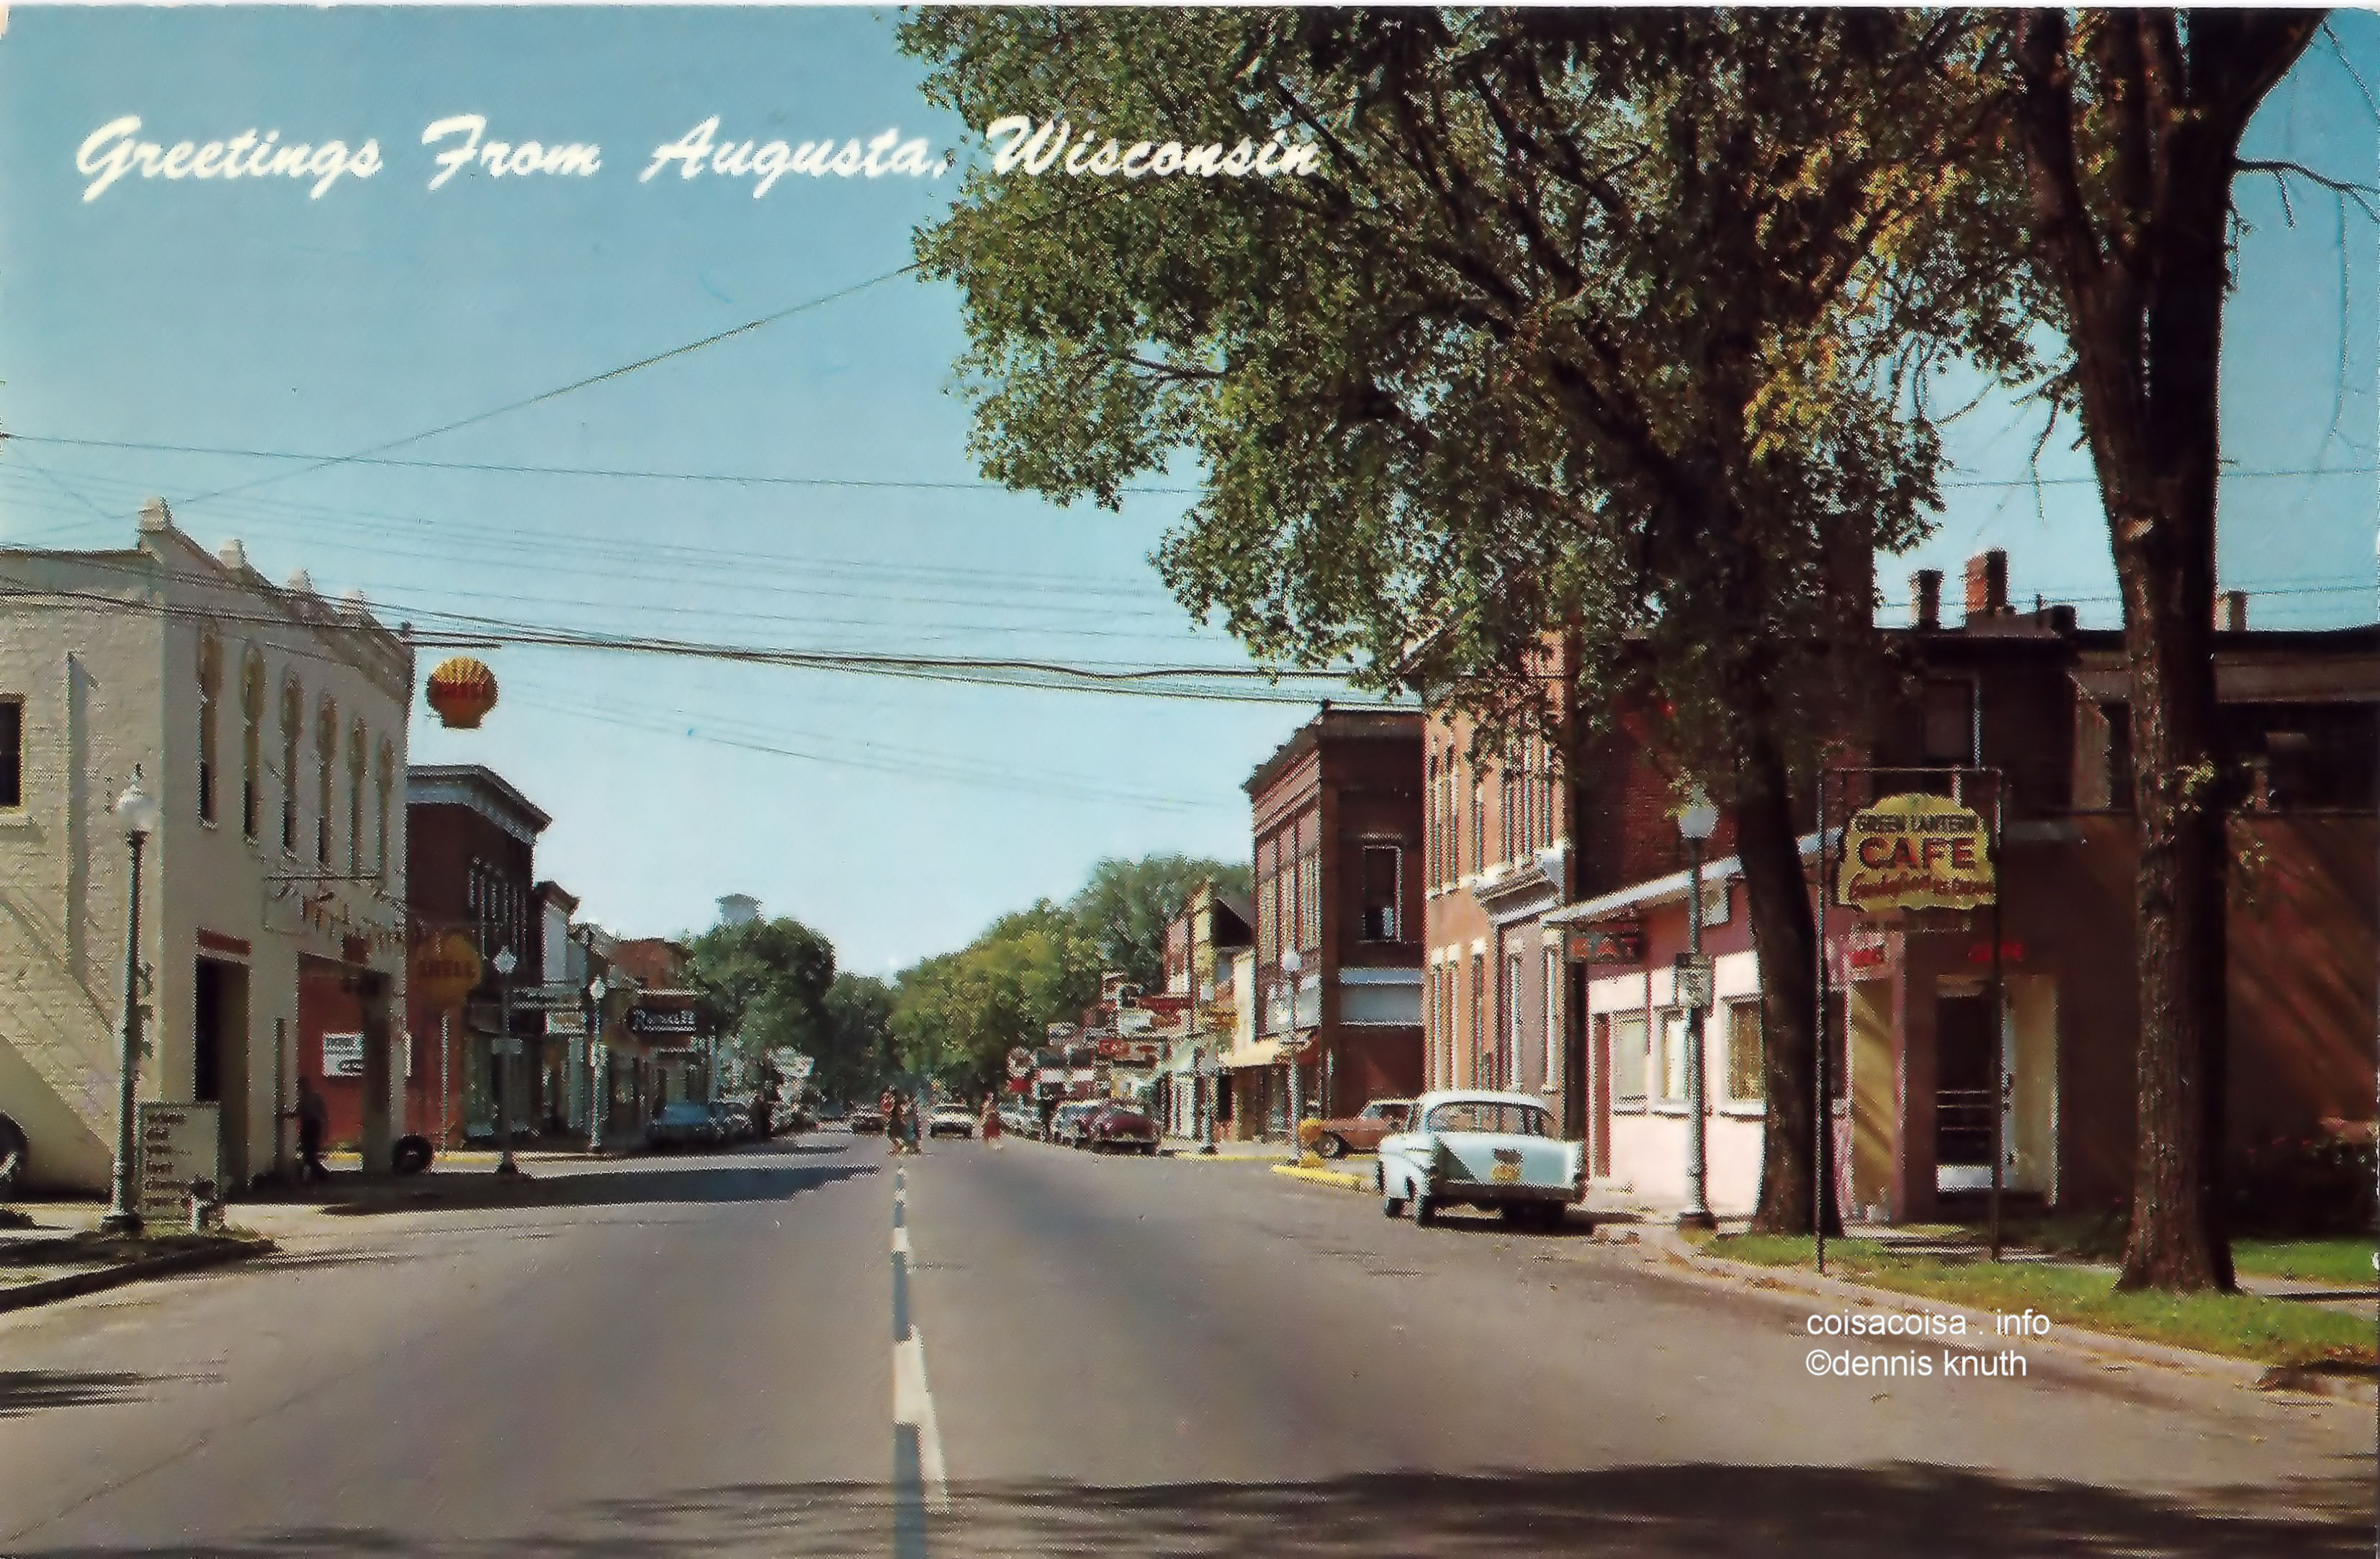 Post Card of Augusta wisconsin Greeting from Augusta